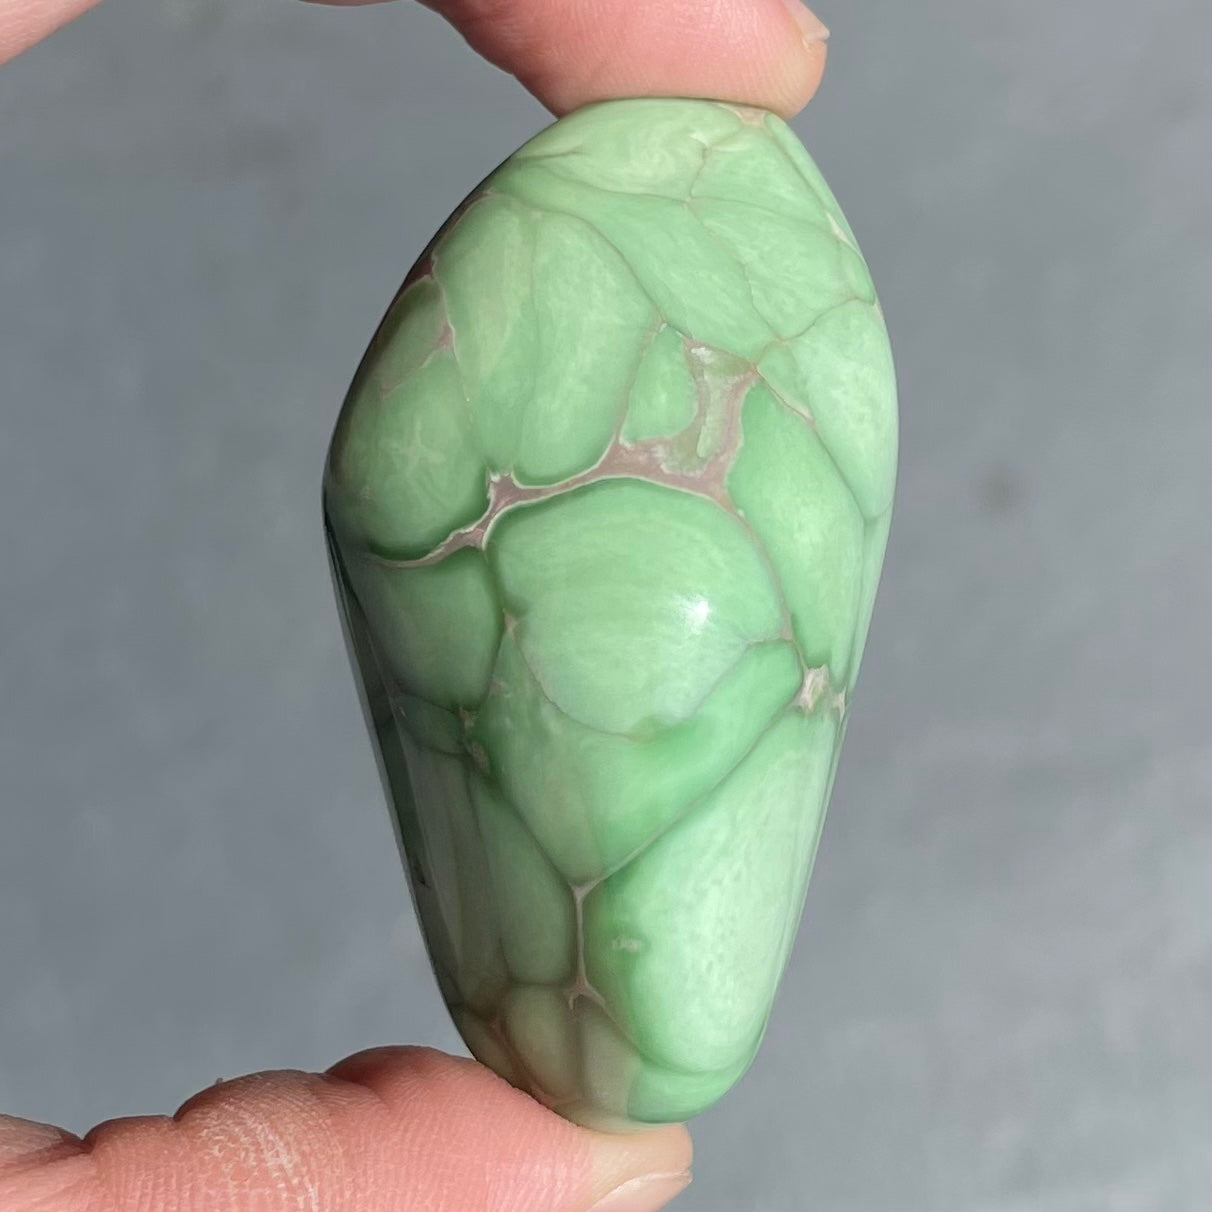 A large, polished variscite stone from Utah.